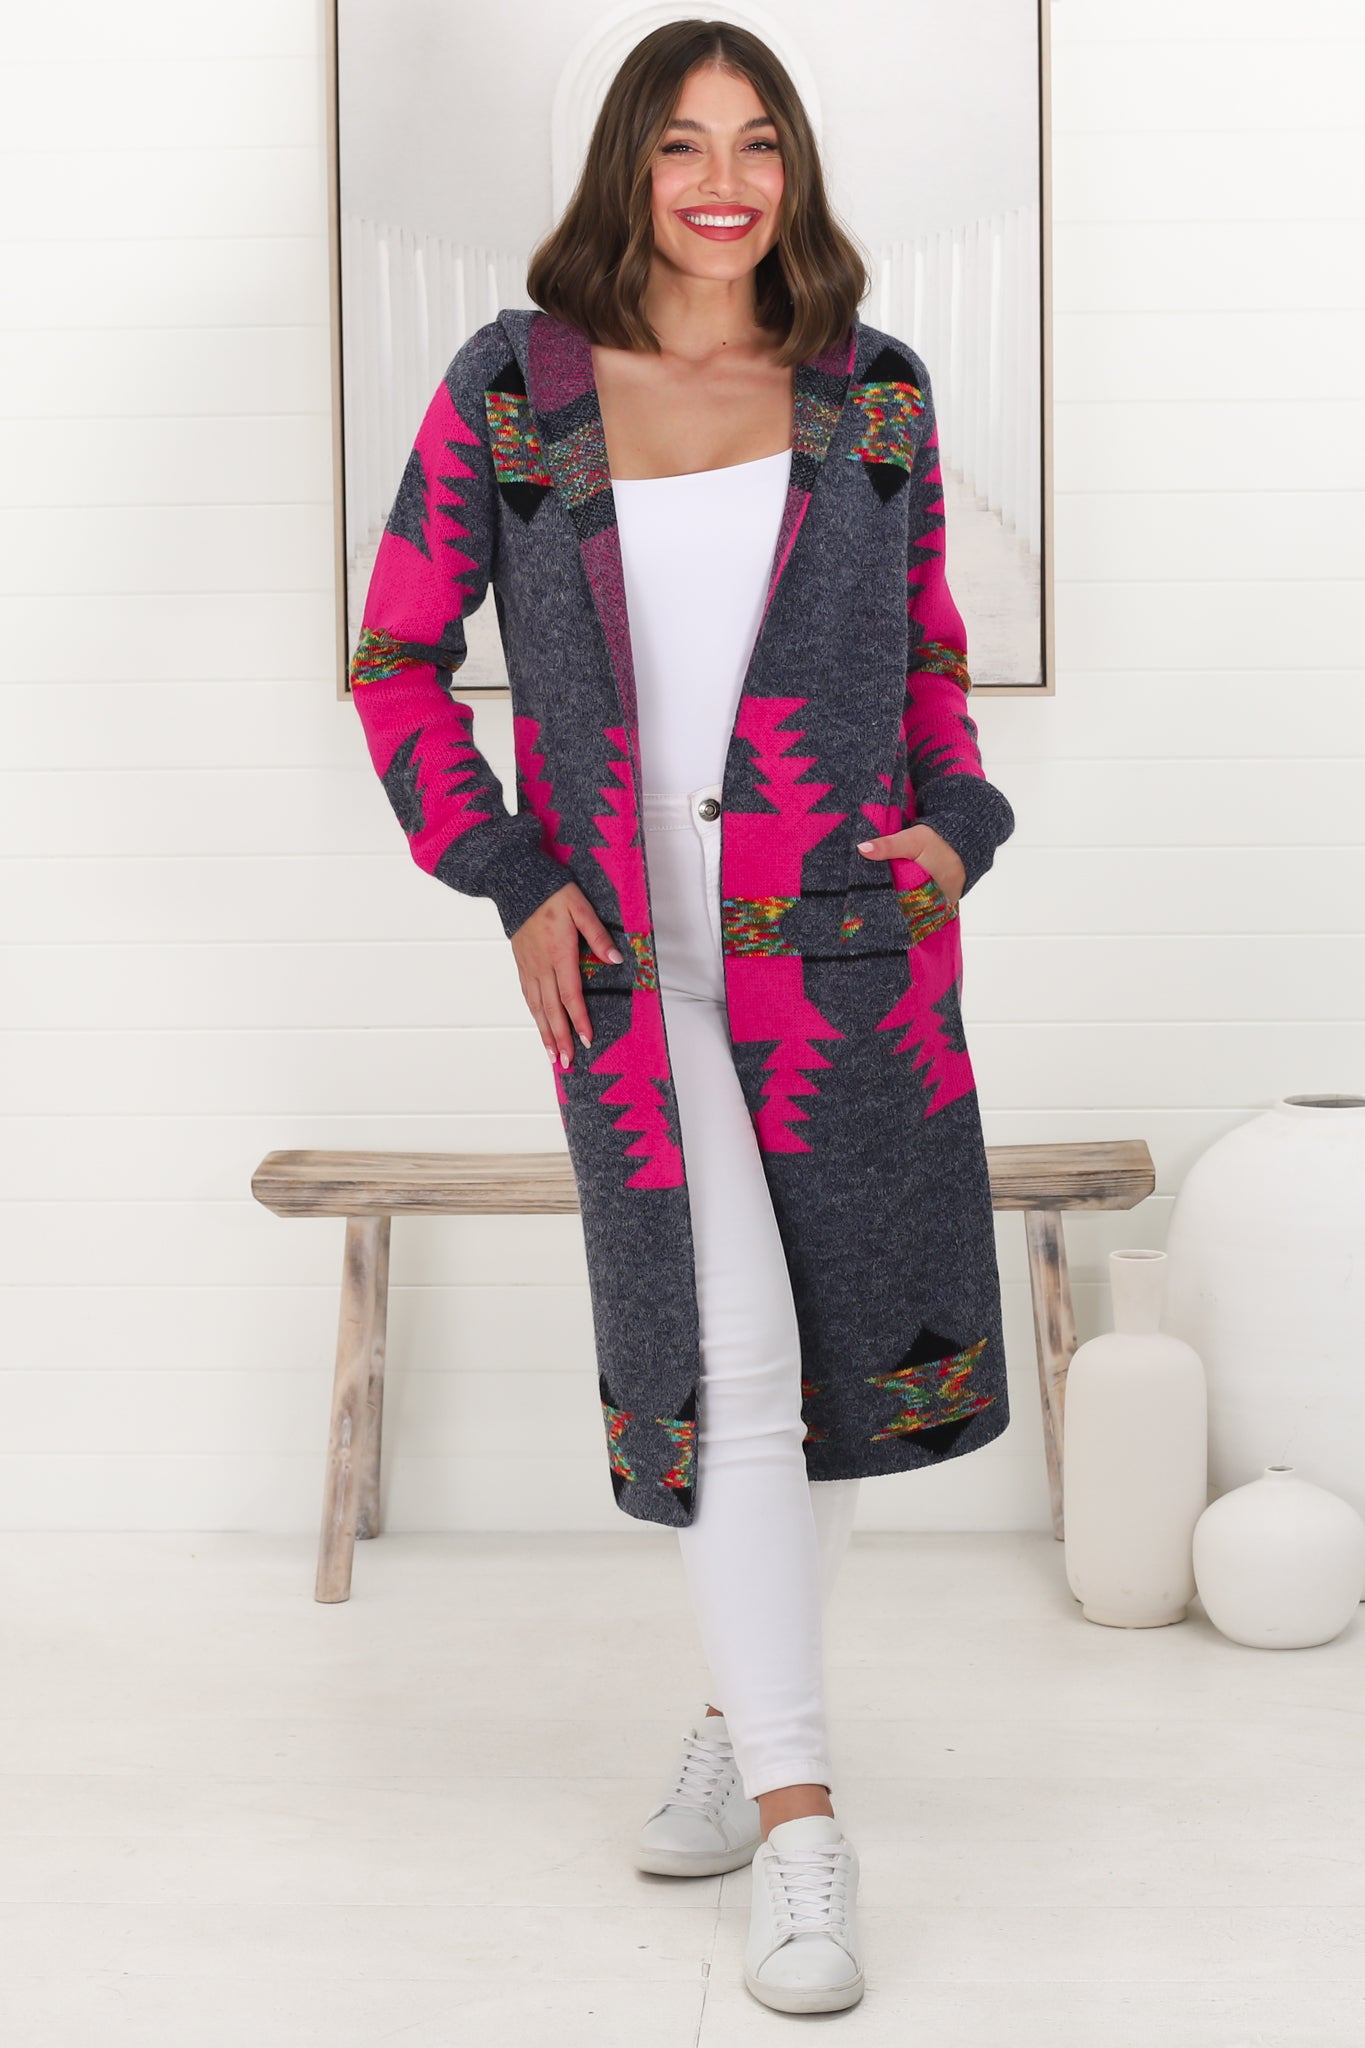 Quest Cardigan - Hooded Long Line Graphic Cardigan in Pink